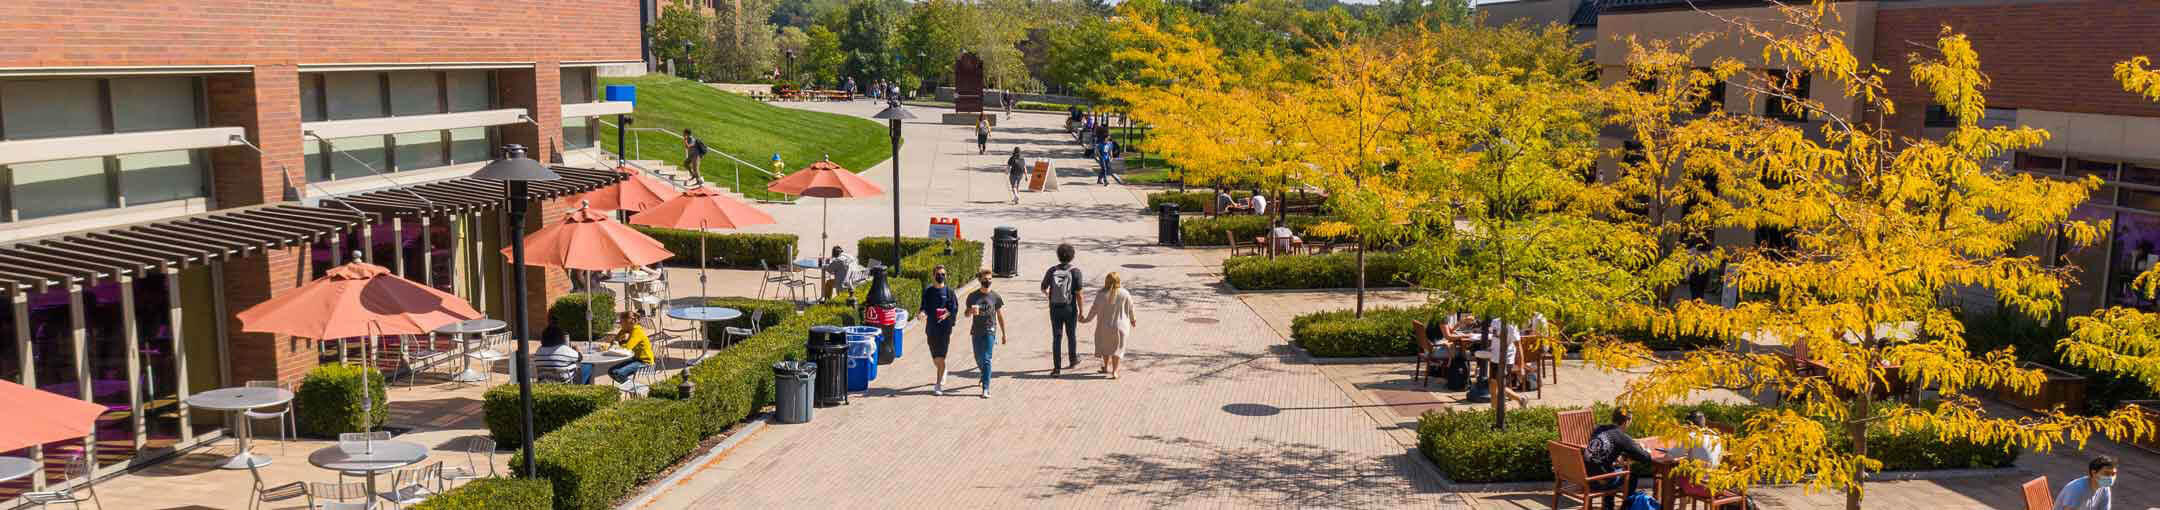 Aerial view of the R I T campus, showing students walking through Global Village on a Fall day.